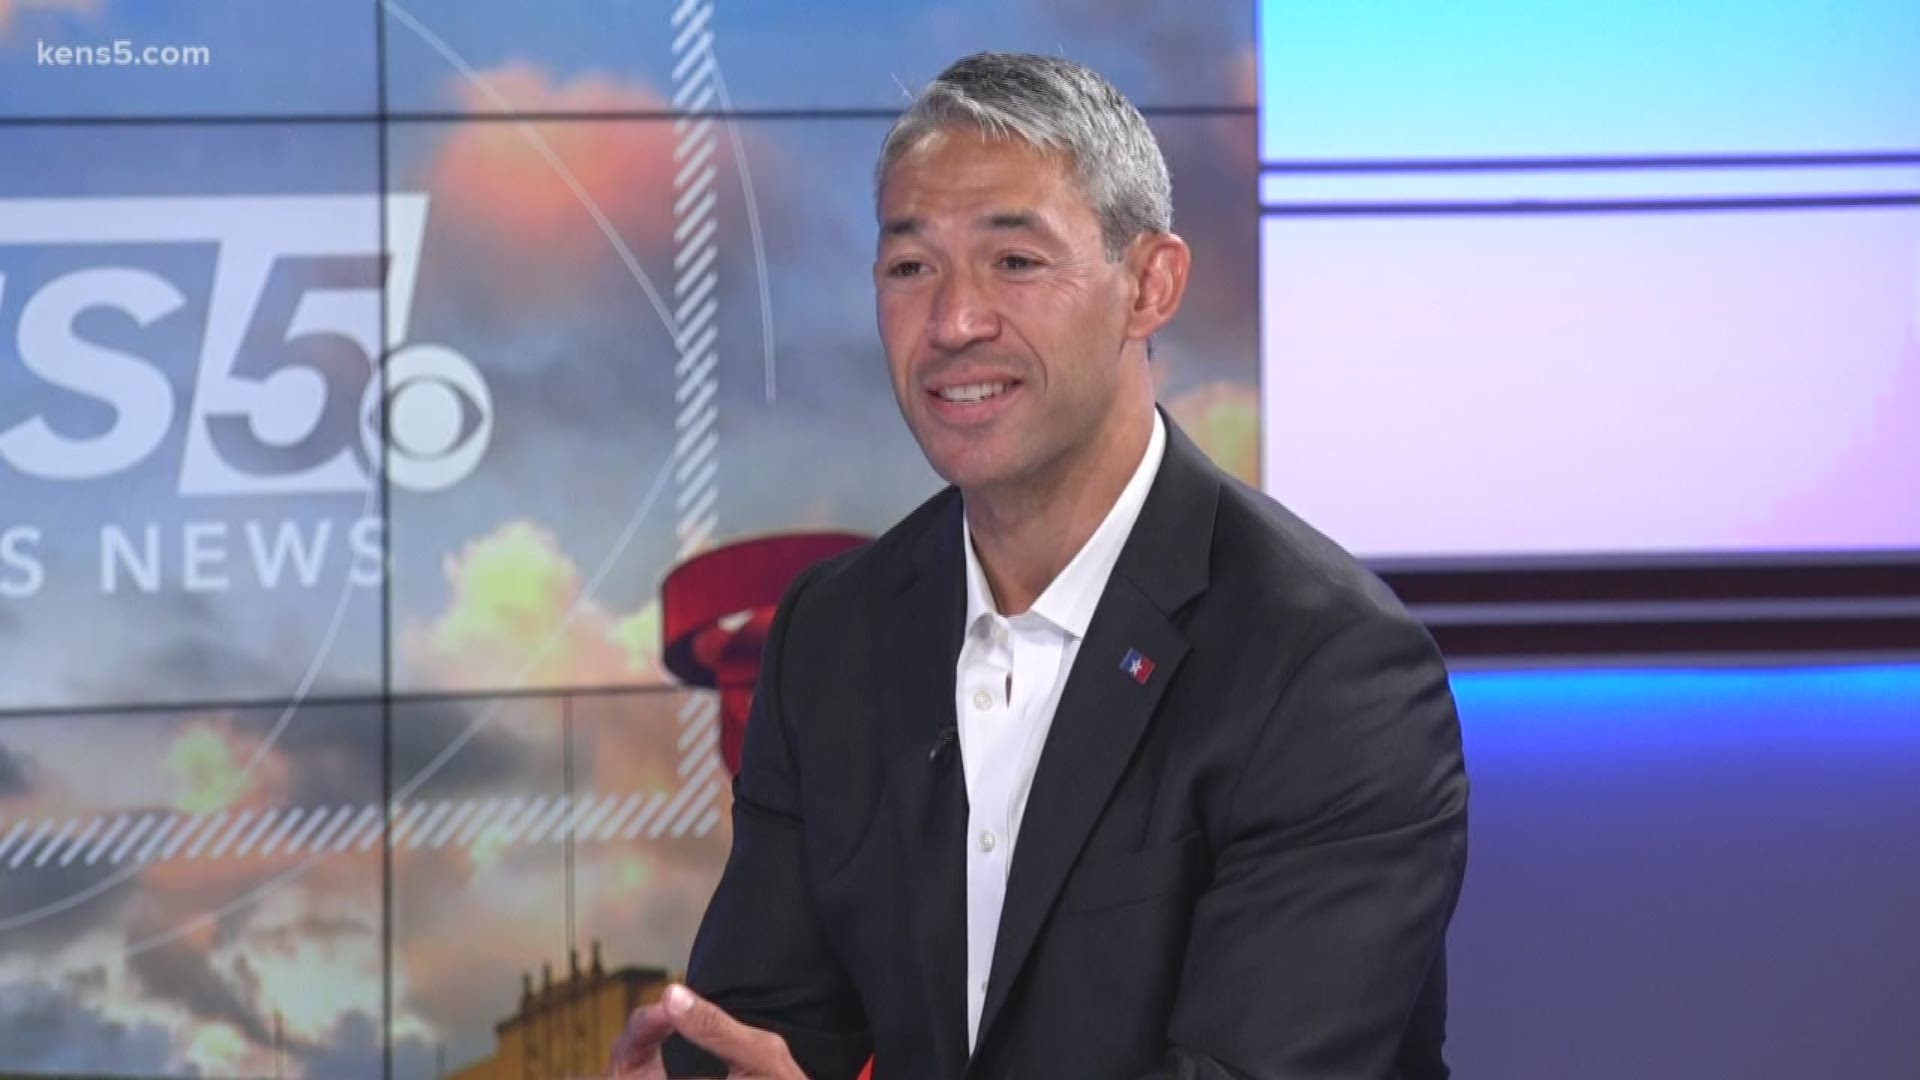 The polls are open and voters will decide who will serve as the mayor of San Antonio. Marvin Hurst sits down with incumbent Ron Nirenberg to talk about the mayoral race.